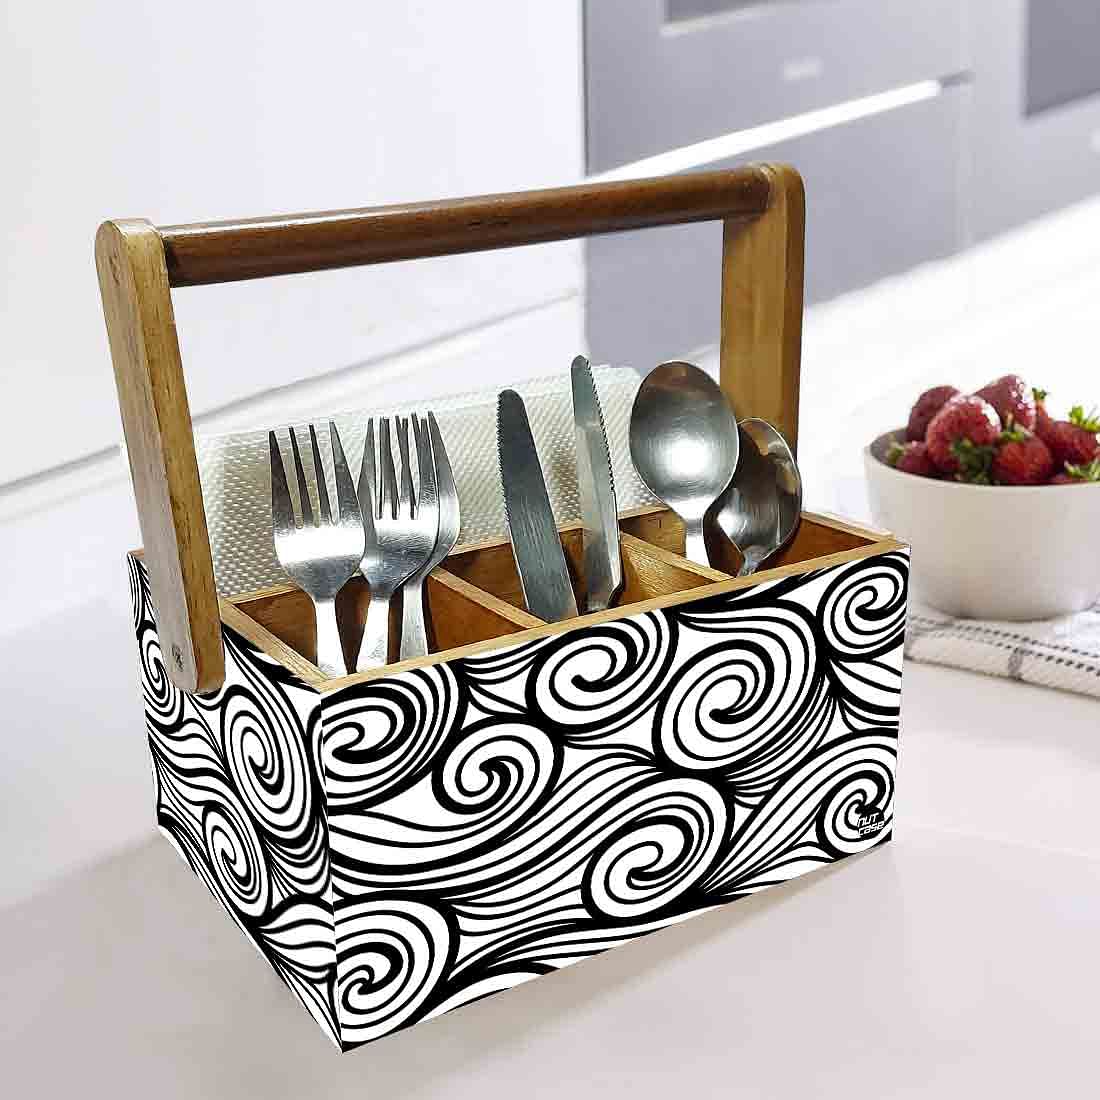 Cutlery Stand With Tissue Holder for Dining Table Spoons Organizer - Black Illusion Nutcase